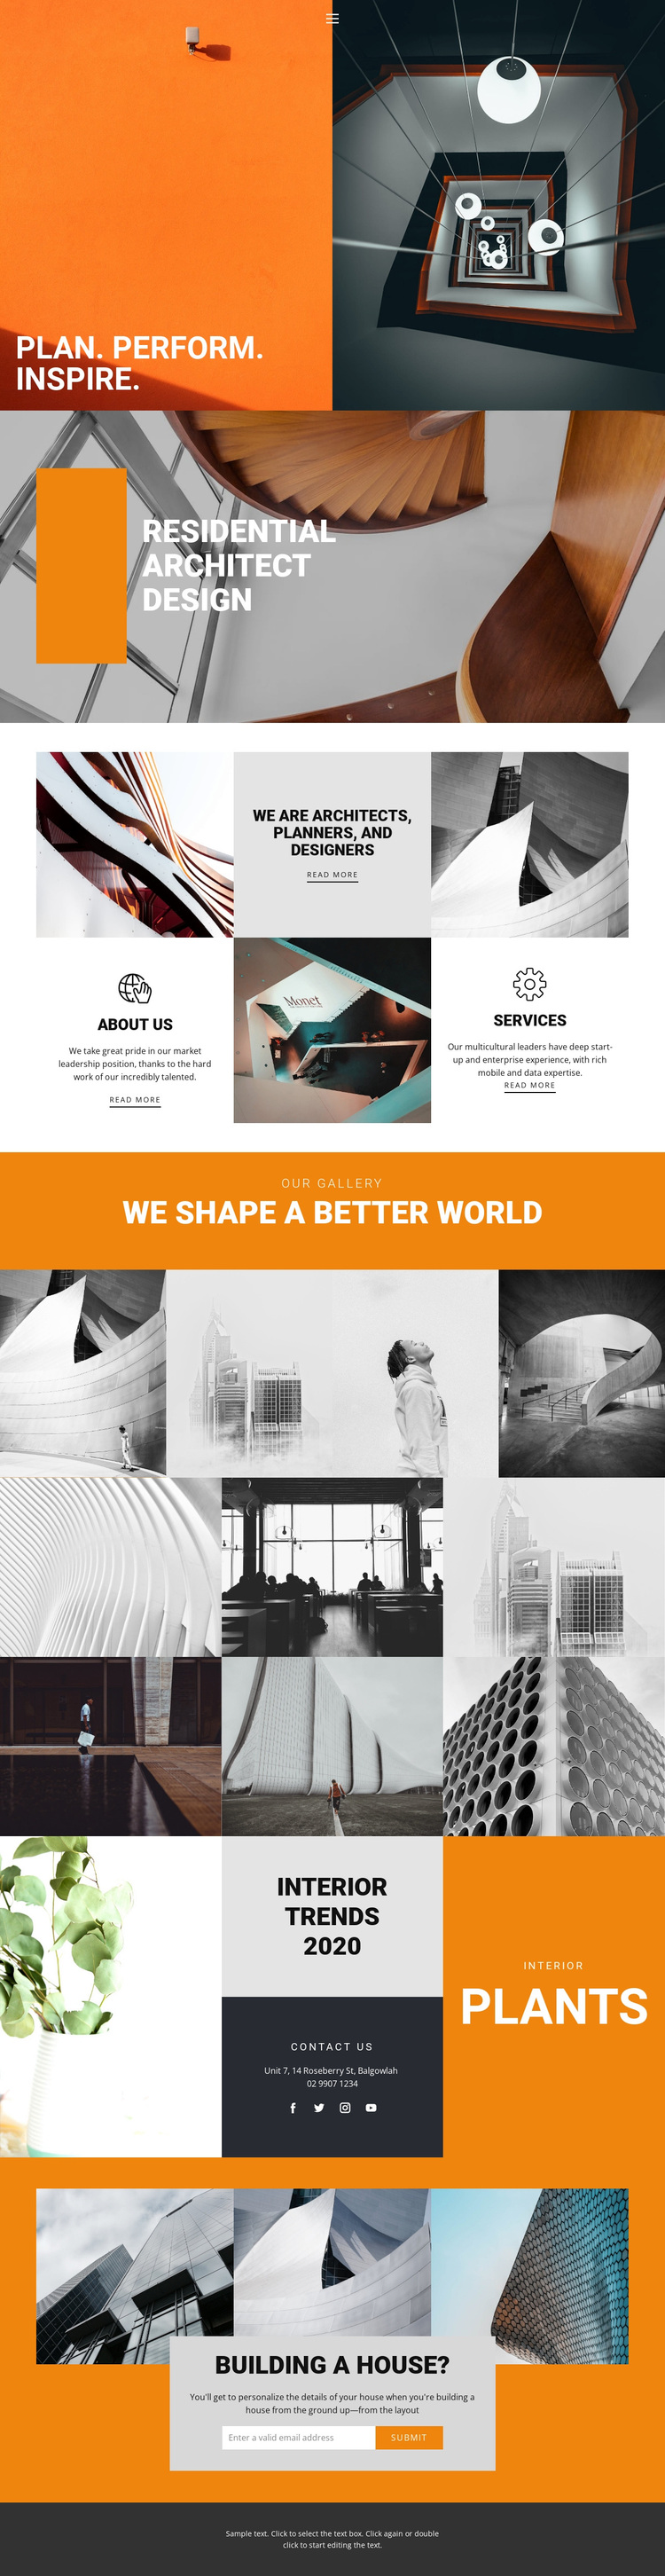 Inspiring ways of architecture Template